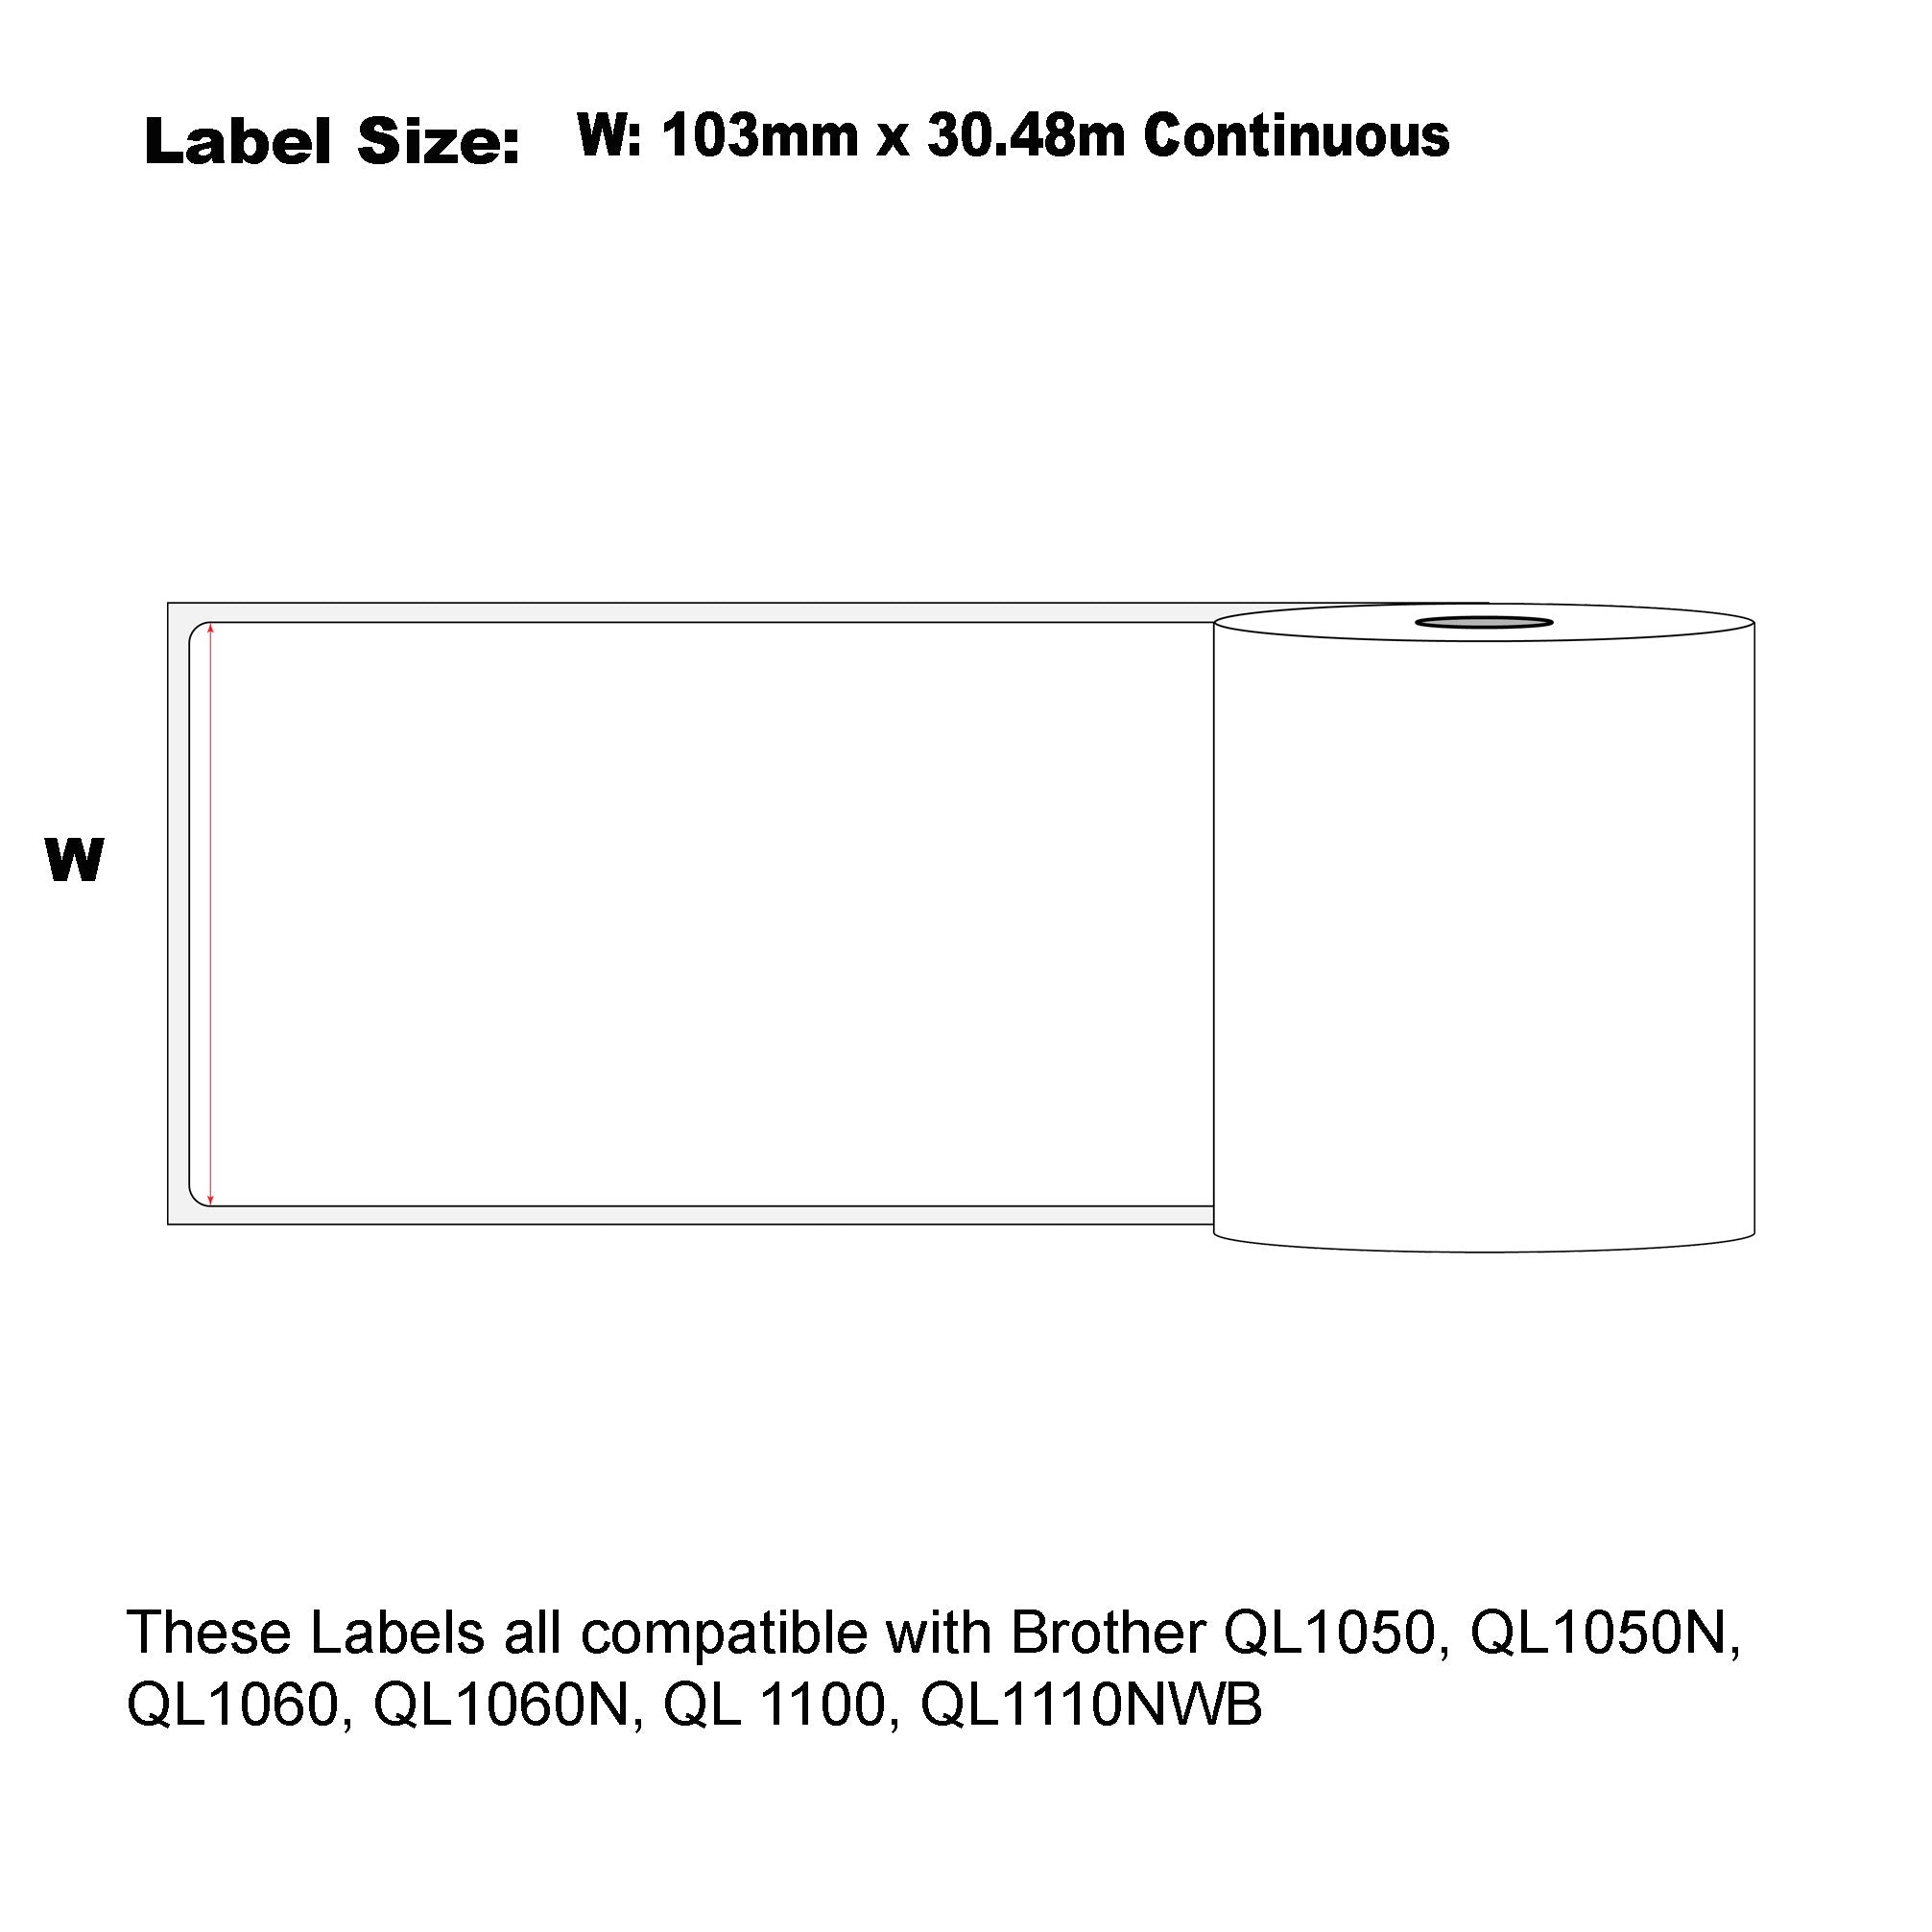 Compatible Brother DK-22246 Continuous Length Refill Labels 103mm x 30.48m-40 Rolls Bulk Buy